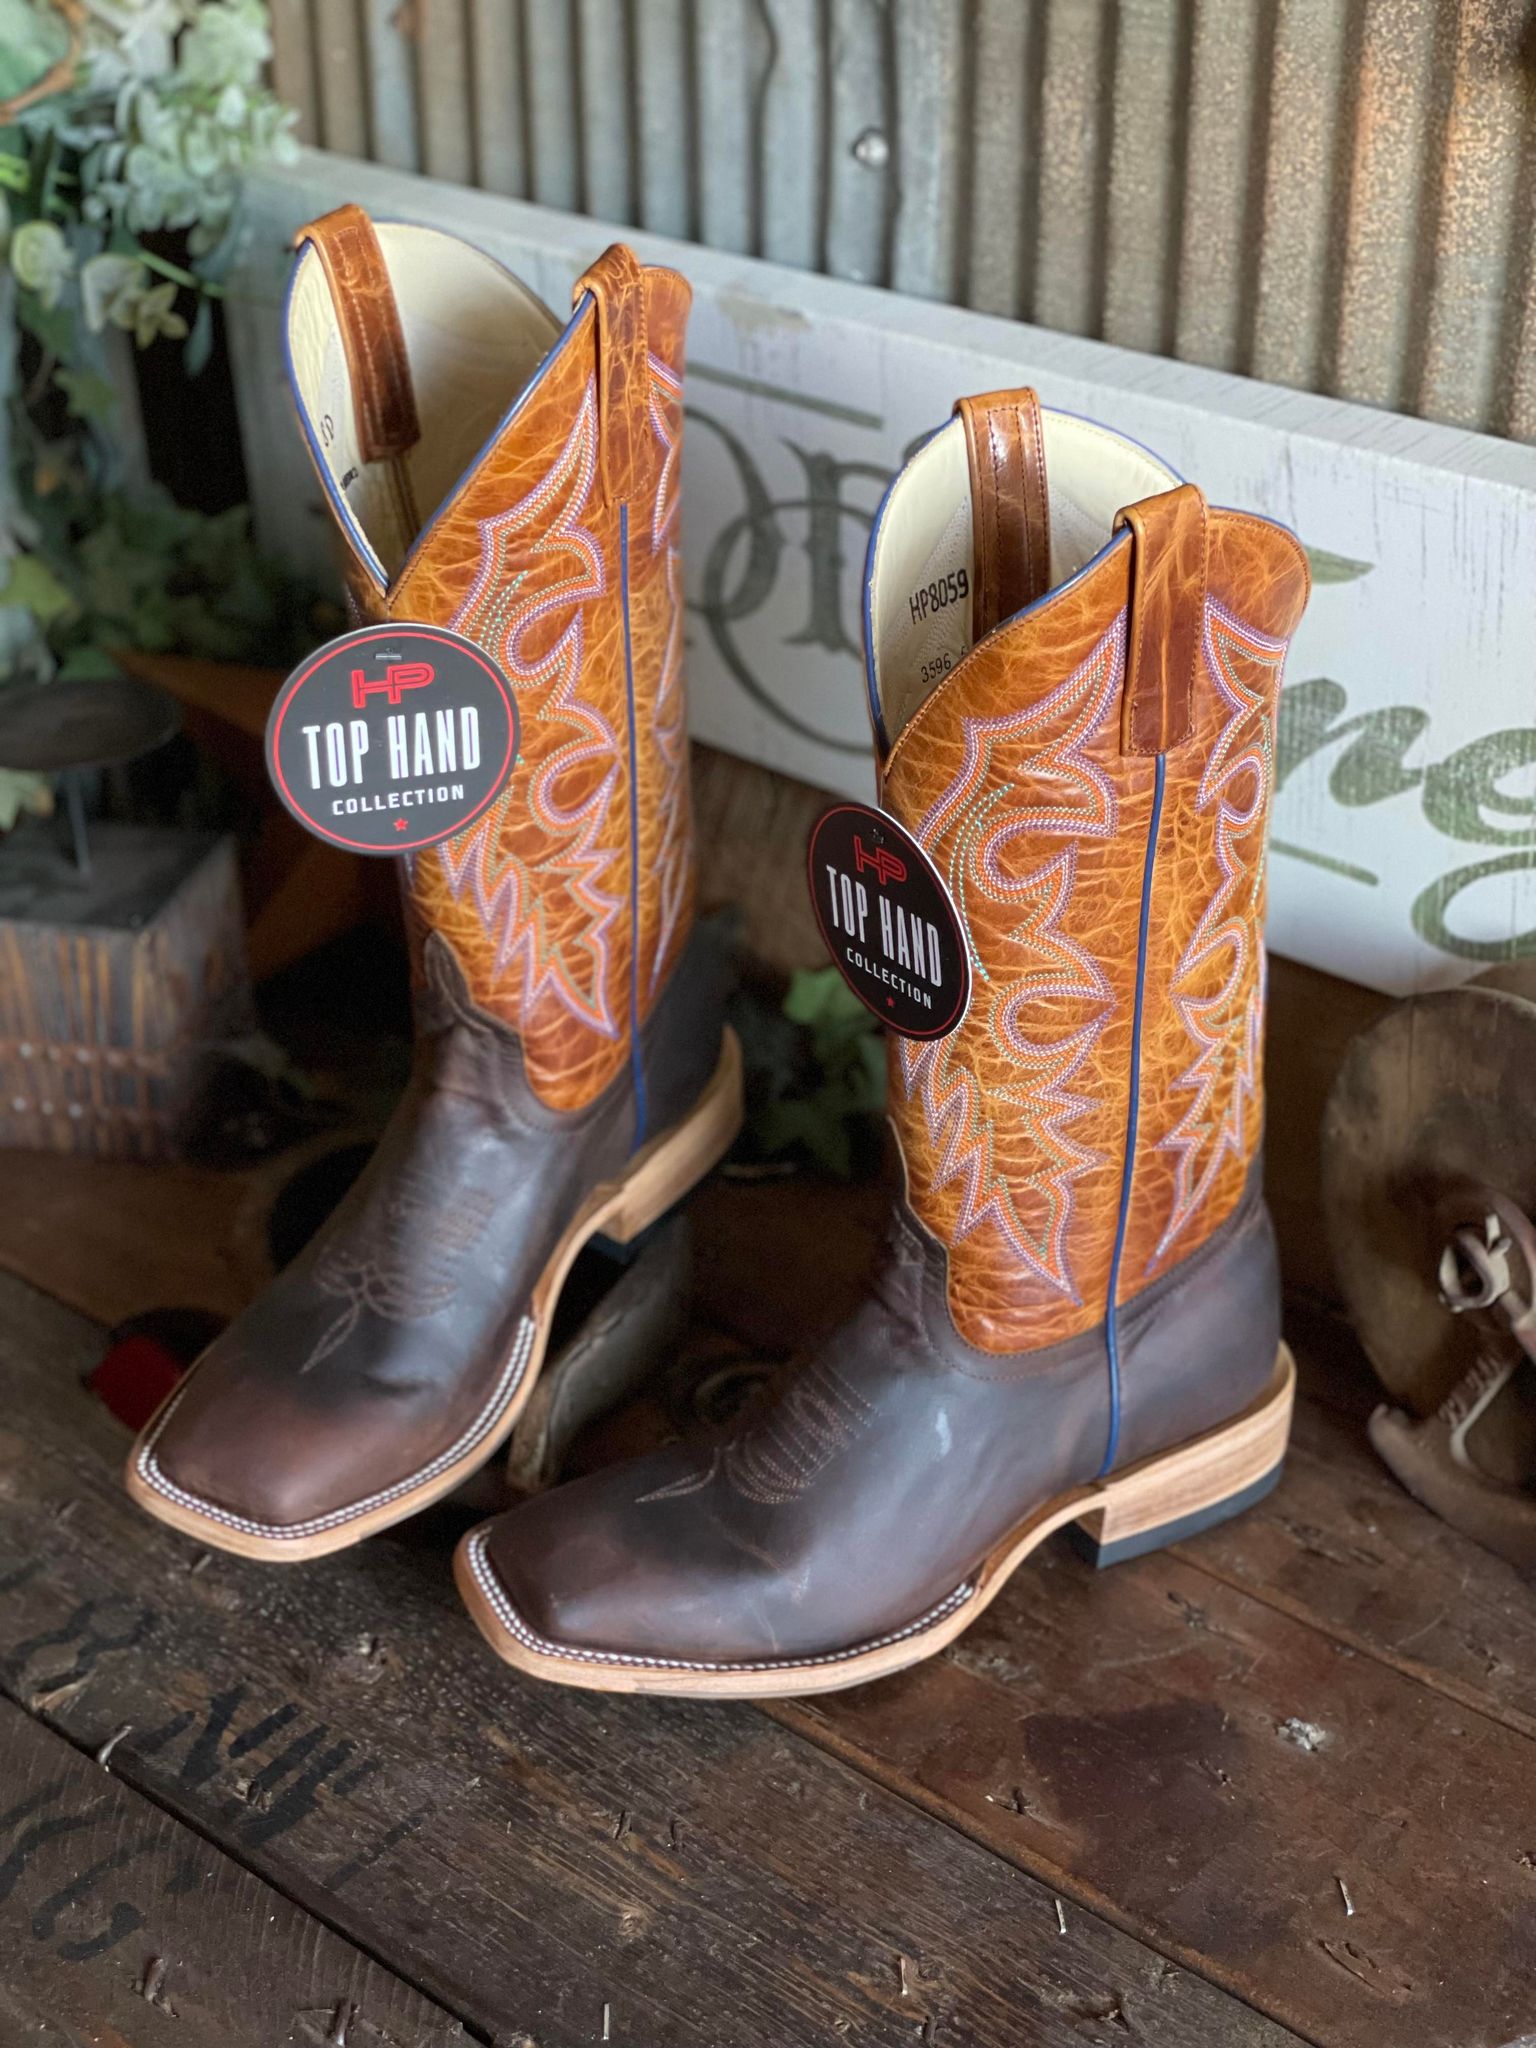 Men's Horse Power Stuffed Horse Boot-Men's Boots-Anderson Bean-Lucky J Boots & More, Women's, Men's, & Kids Western Store Located in Carthage, MO